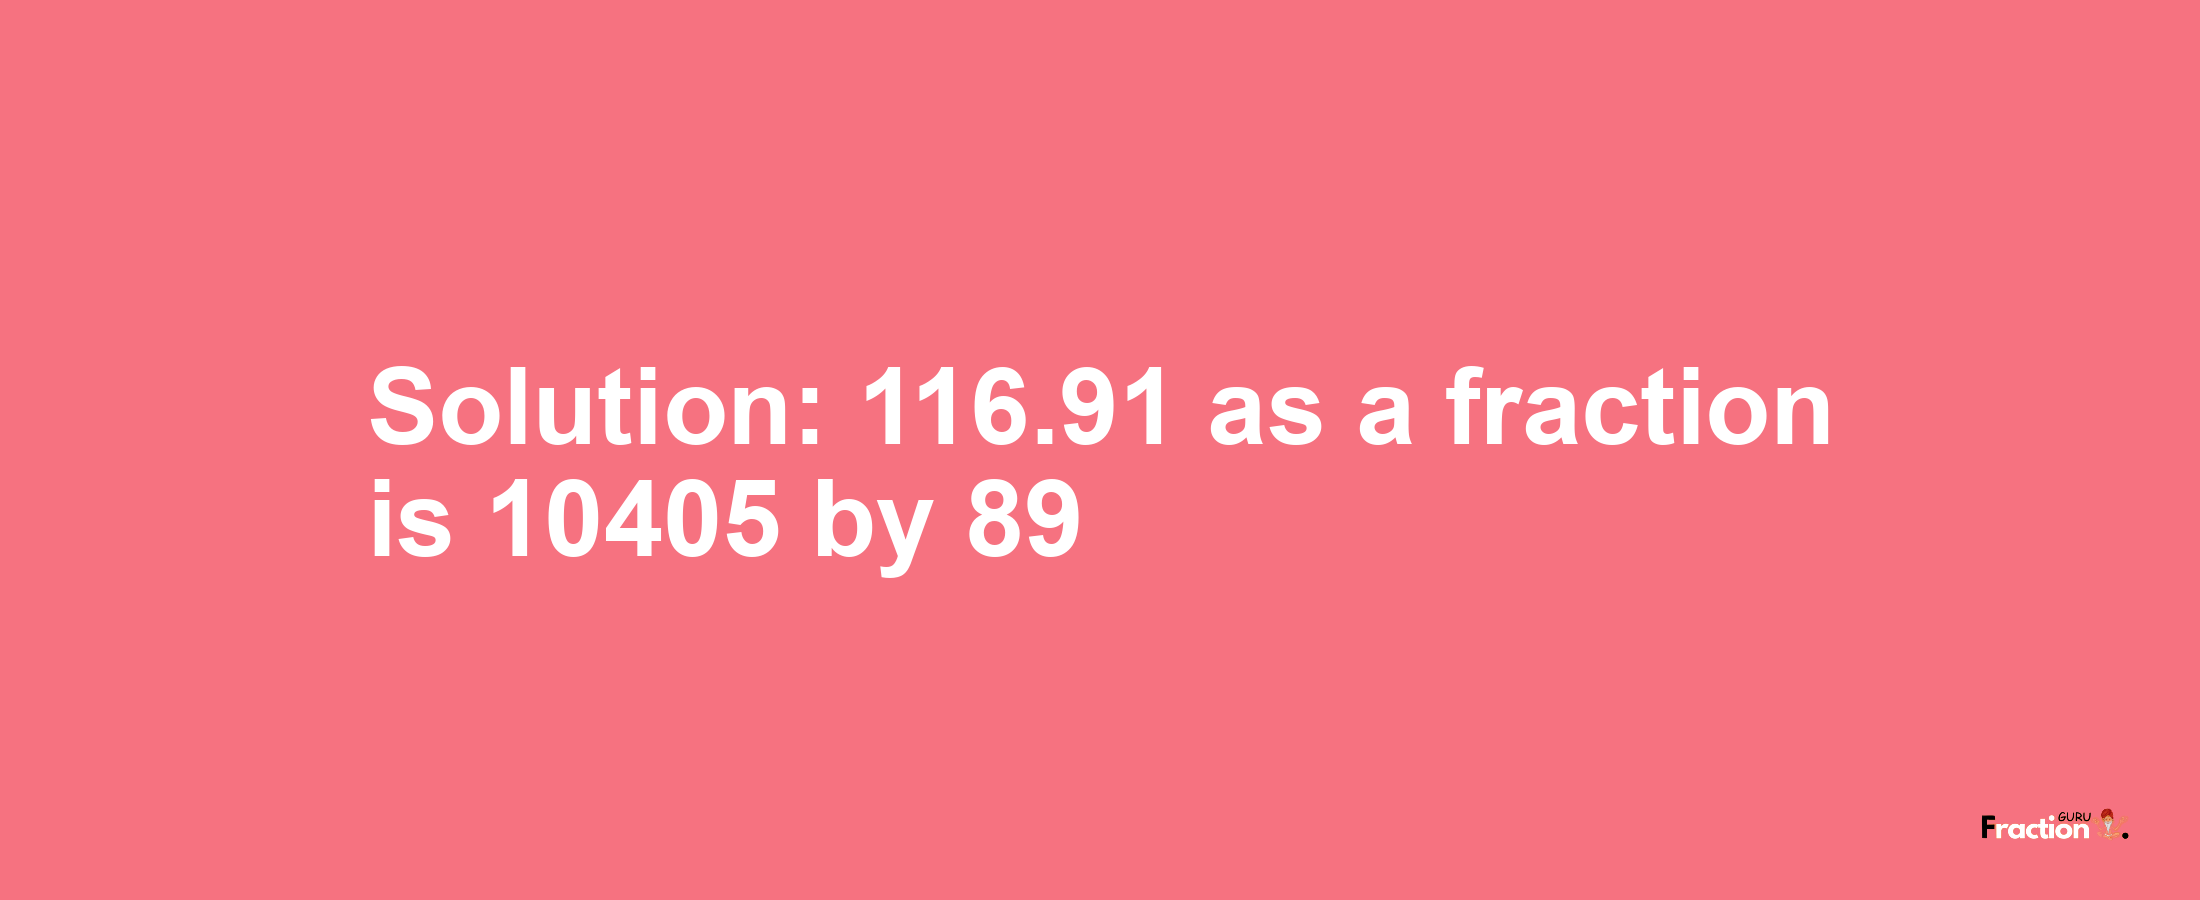 Solution:116.91 as a fraction is 10405/89